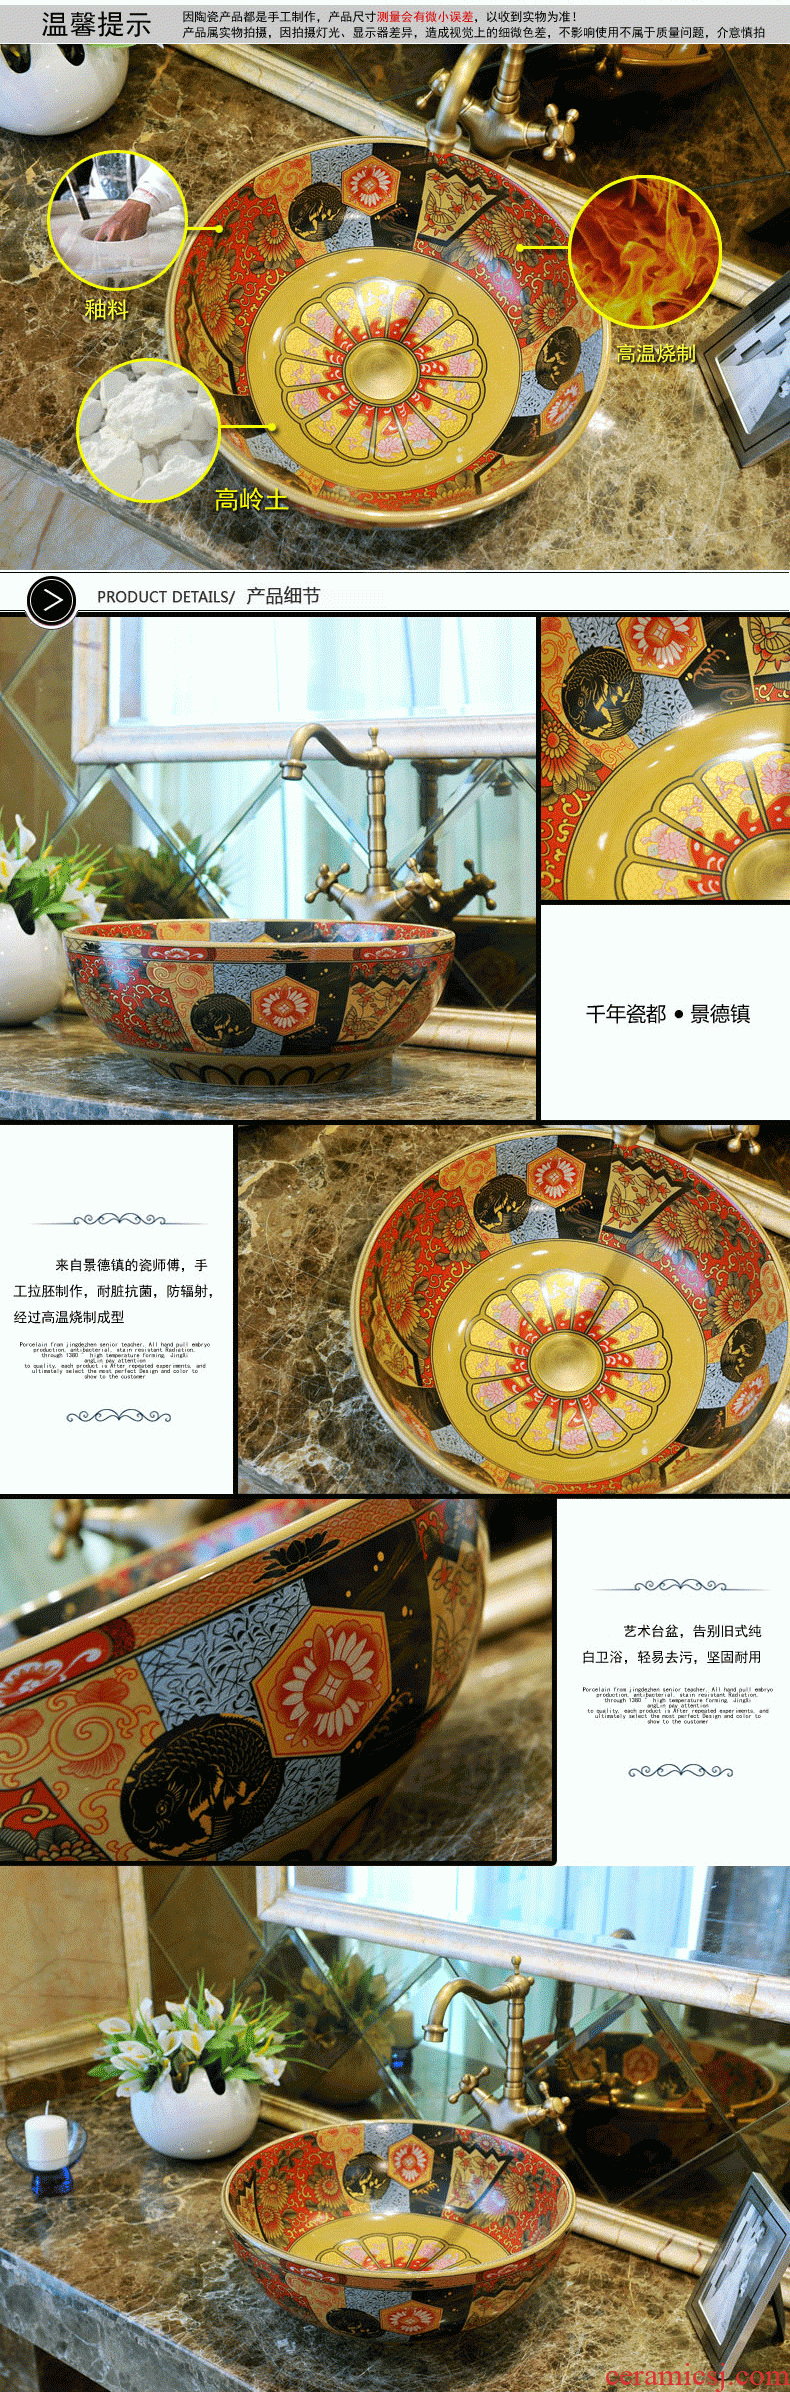 The stage basin ceramic contracted pattern basin European toilet lavabo, restoring ancient ways round lavatory basin